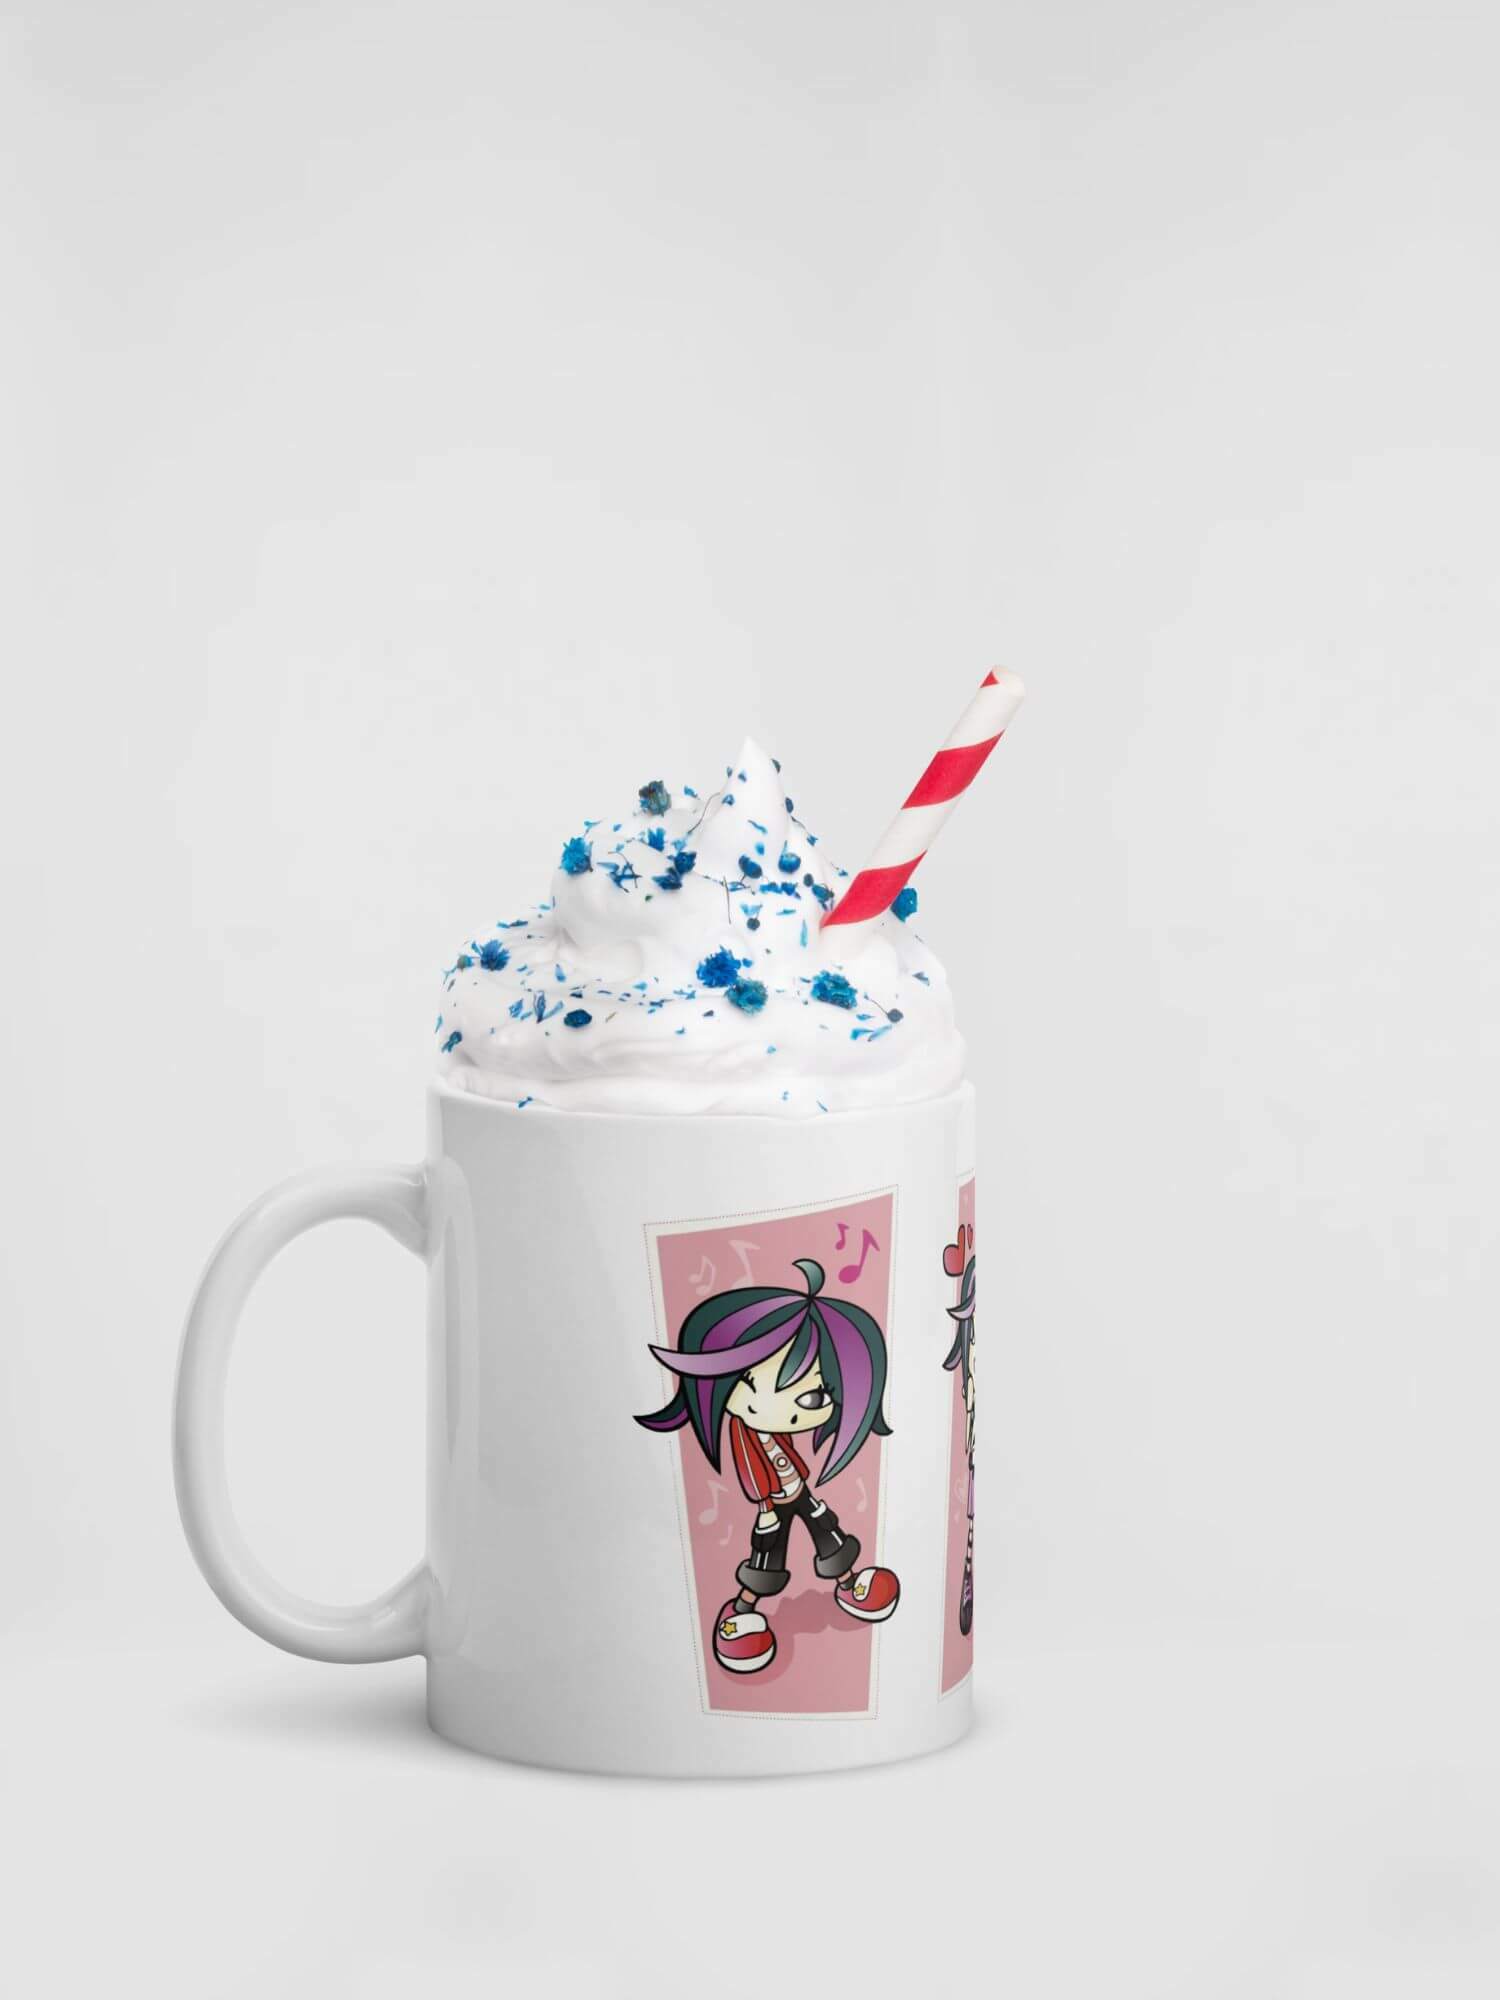 Glossy Teenage Girl Mug                   Cartoon fashion girls character drinks cup coffee, tea, juice, milk drinking cups miteigi branded product item tumblers ceramics in white with pink multicolor pattern Ceramic Anime Gifts punk grunge y2k teenagers wishes mugs